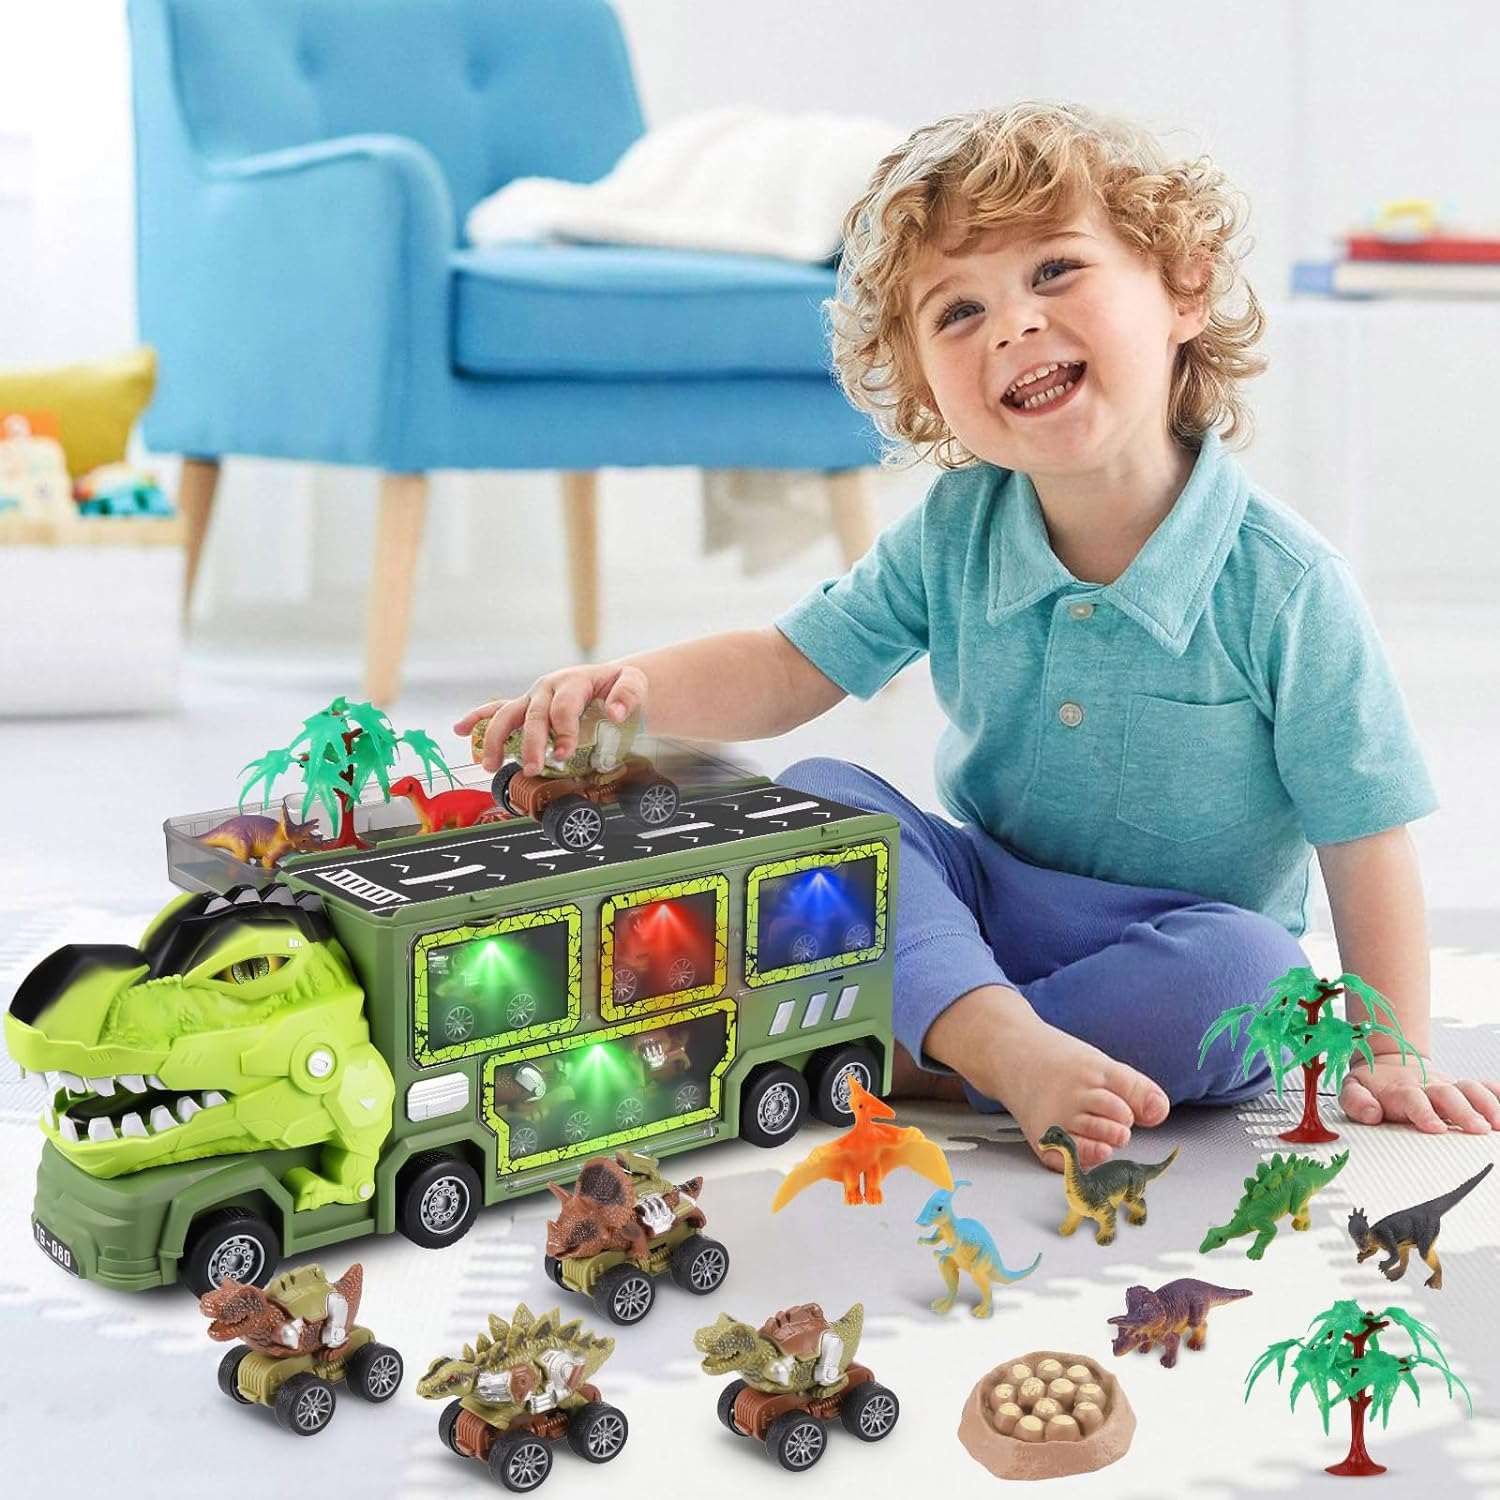 21 in 1 Dinosaur Truck Toys for 3 4 5 6 7 Year Old Boys Girls - T-Rex Transport Car Carrier Truck with 5 Pull Back Dinosaur Cars and 9 Dino Figures - Cykapu